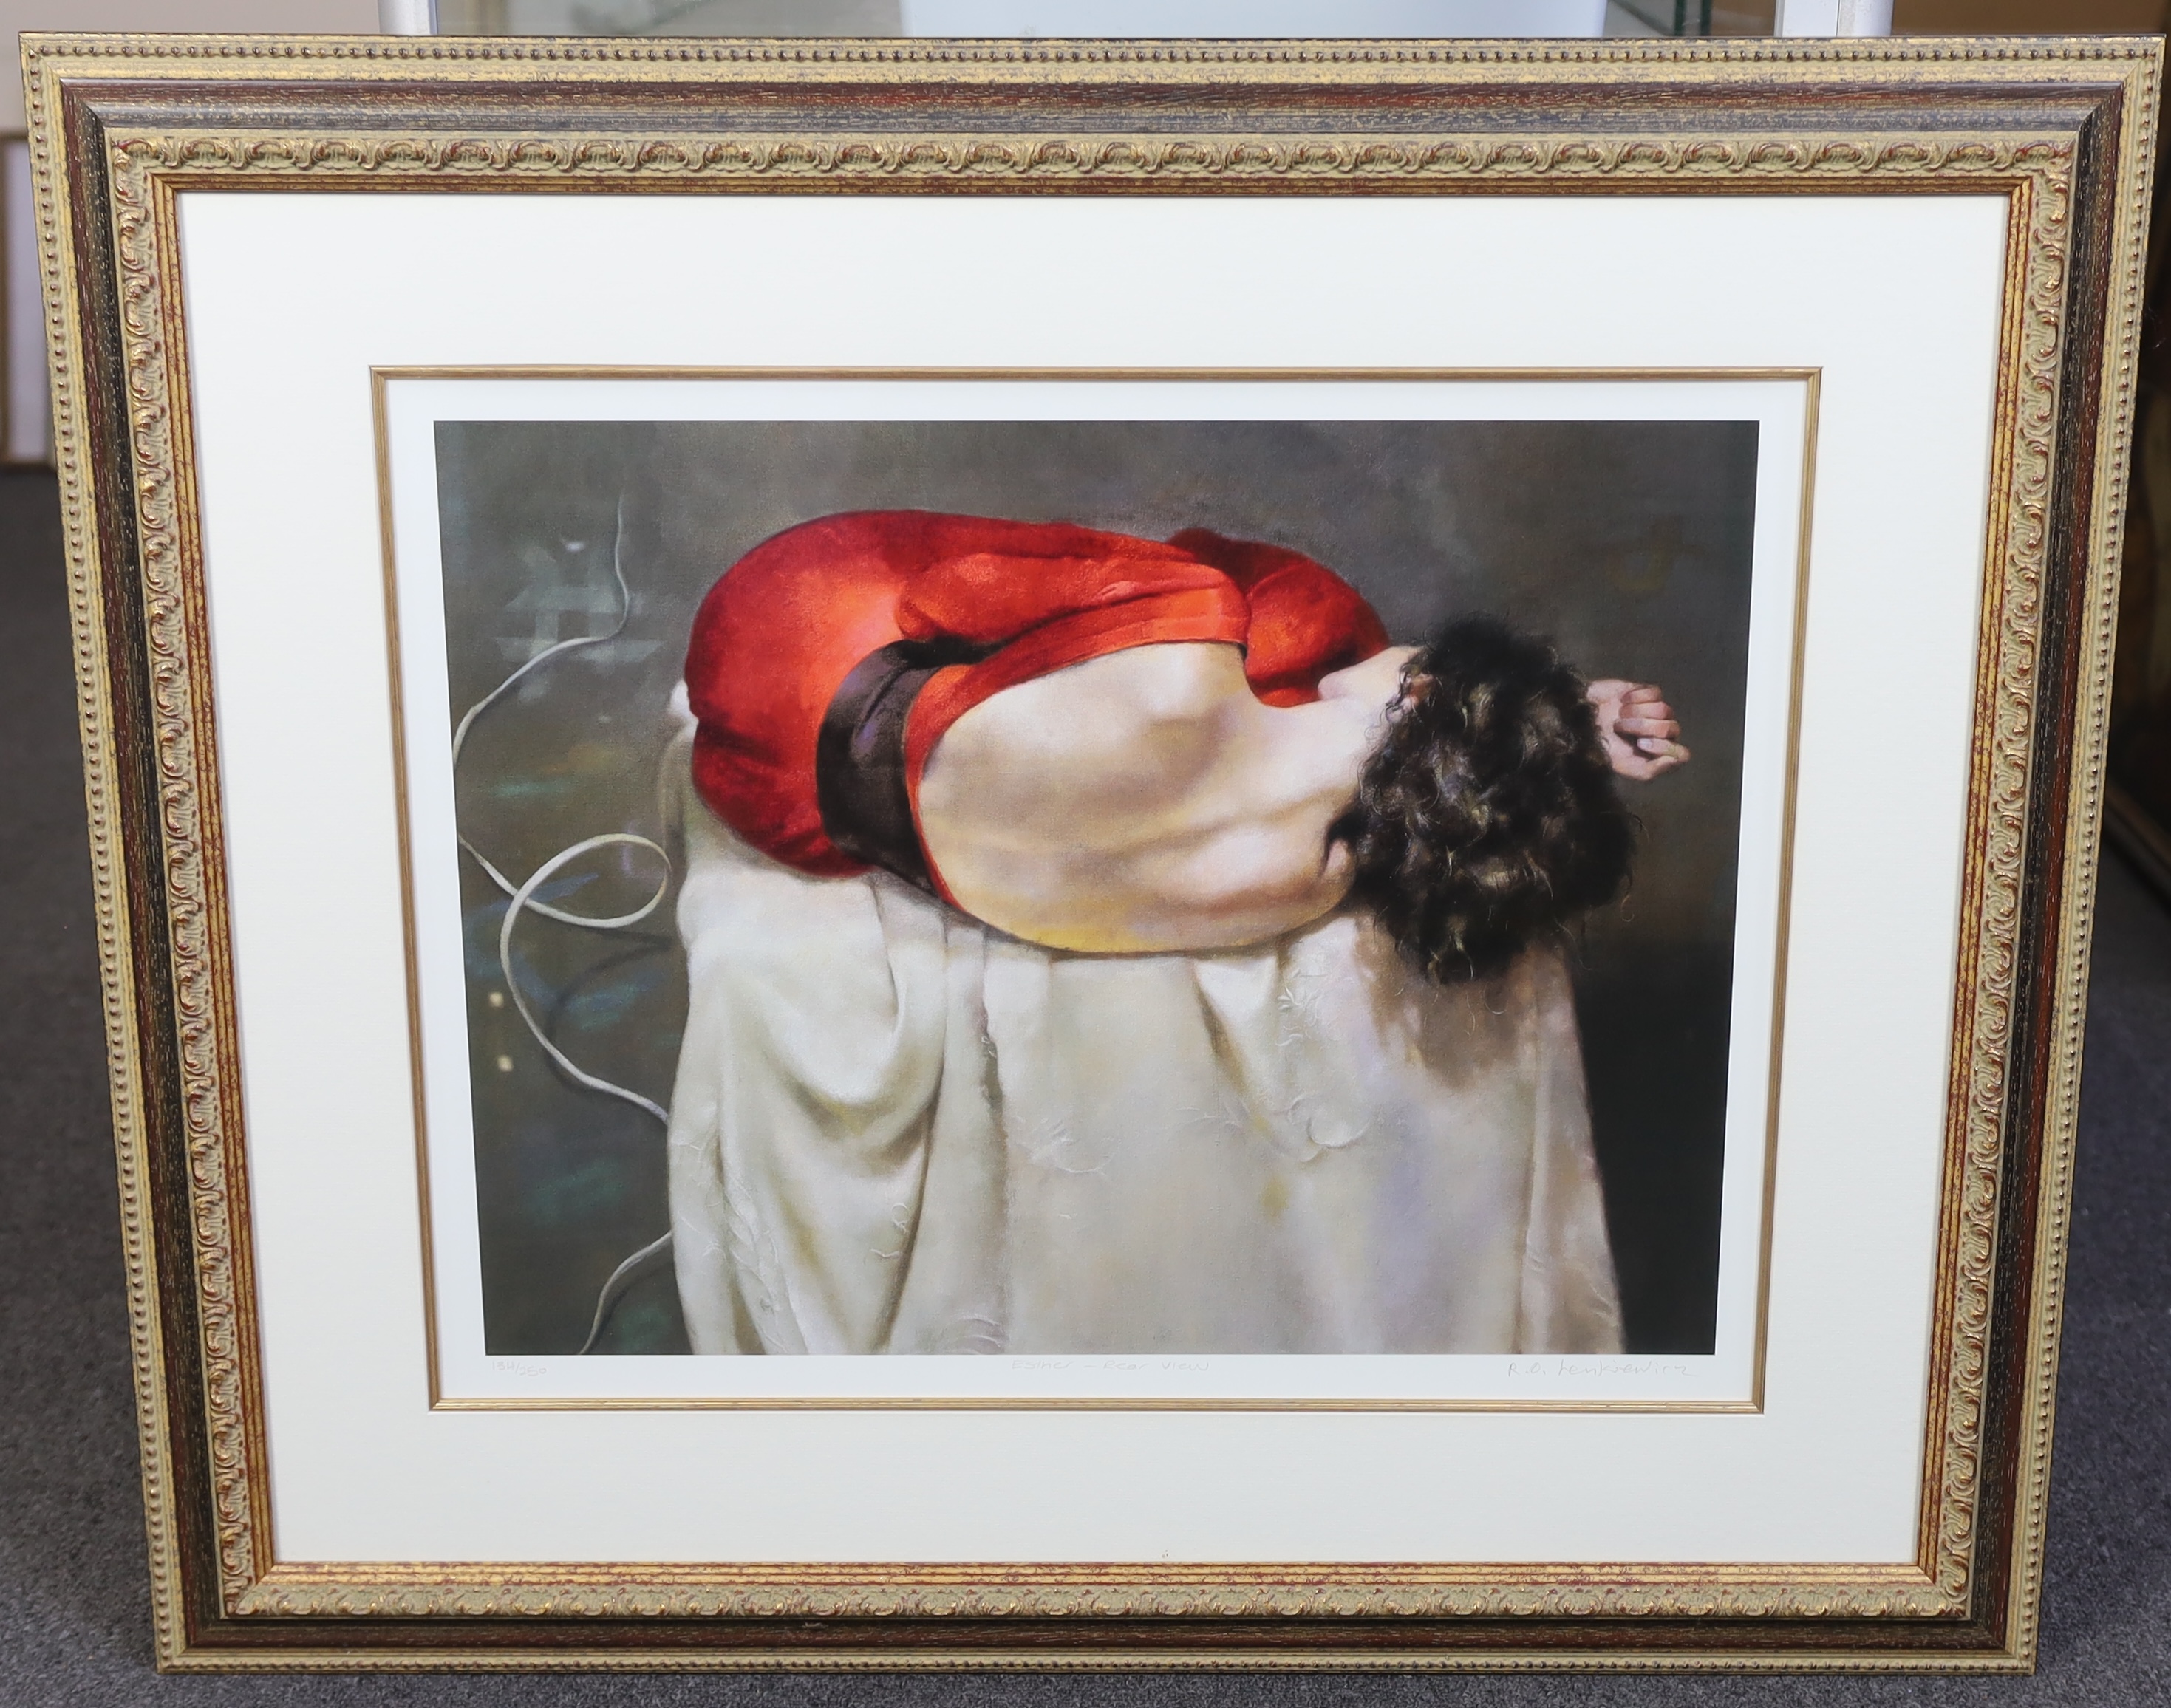 Robert Lenkiewicz (1941-2002), offset lithograph, 'Esther - rear view', signed in pencil and titled, 134/250, 40 x 52cm. Condition - good